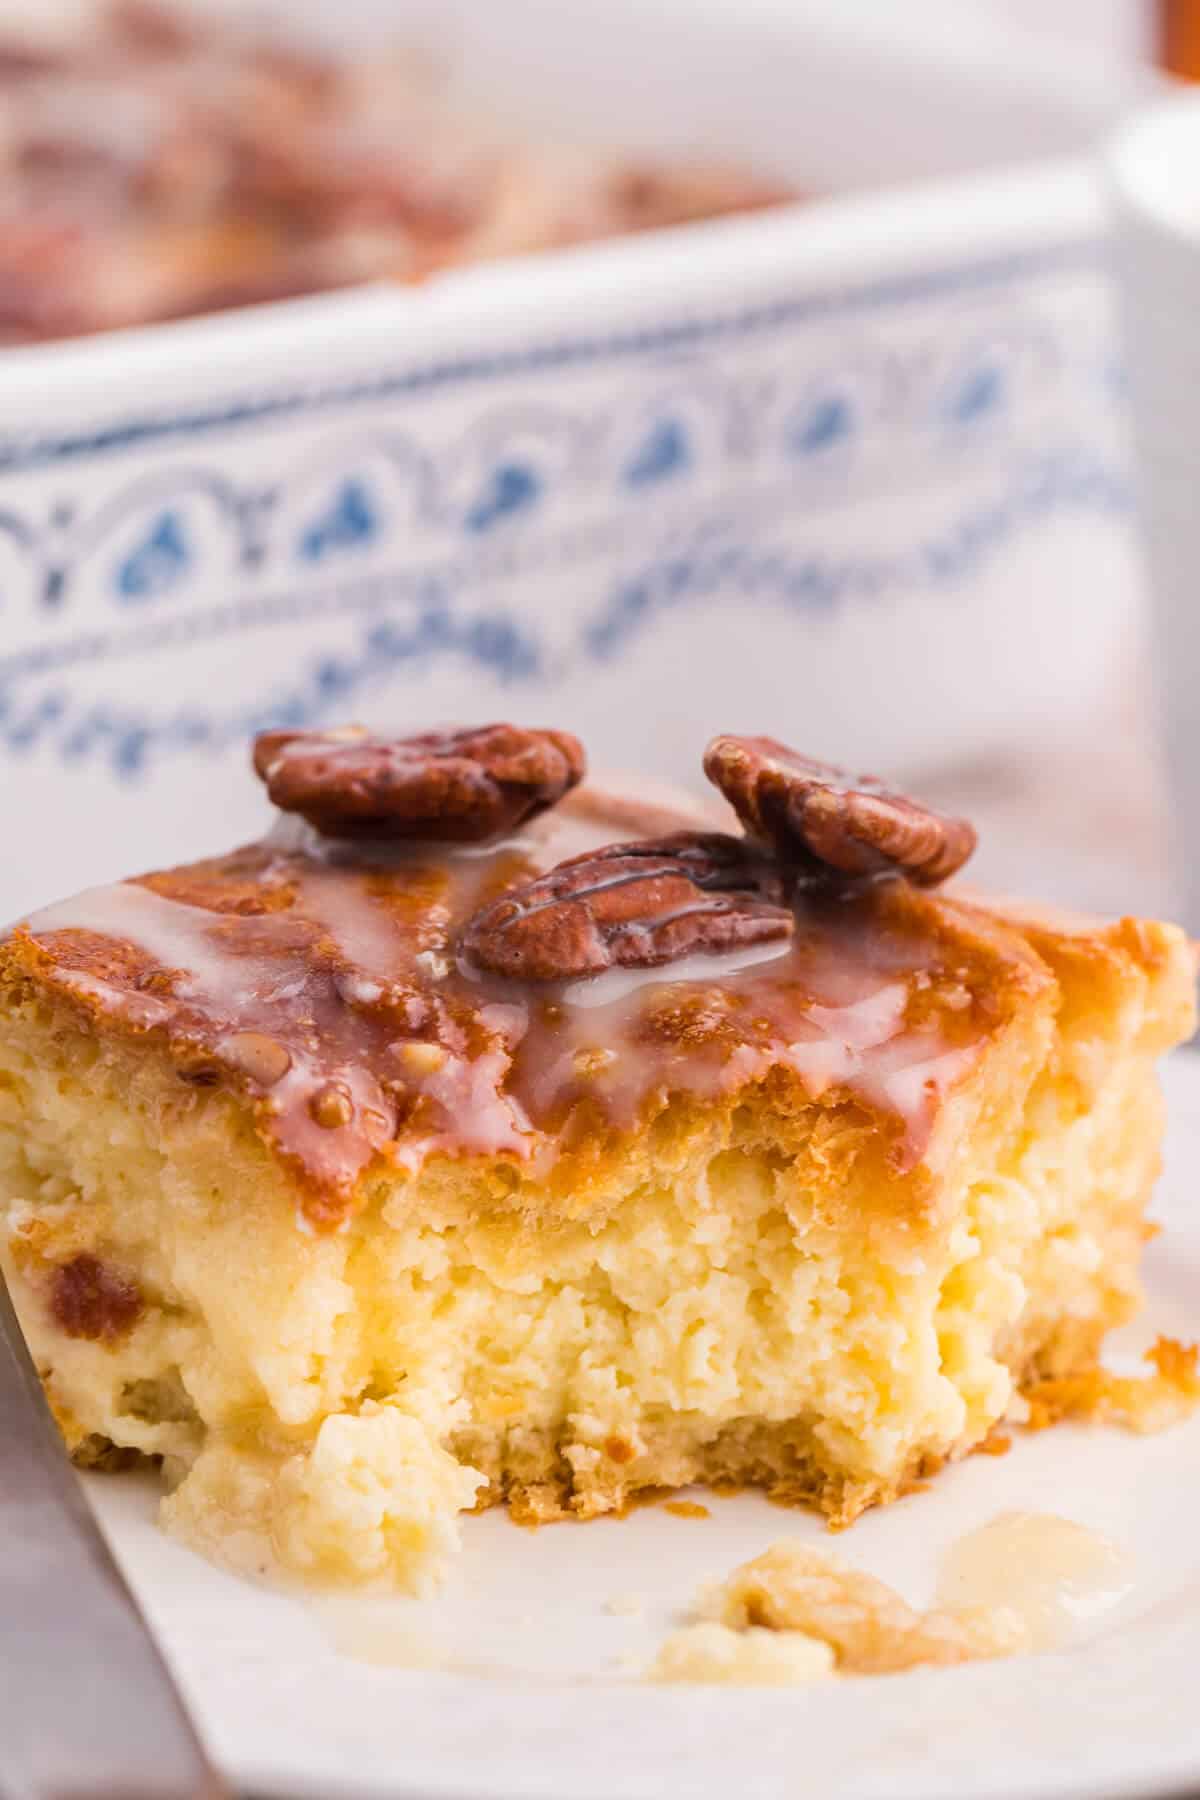 A piece of maple pecan danish bake on a plate with a bite out of it.